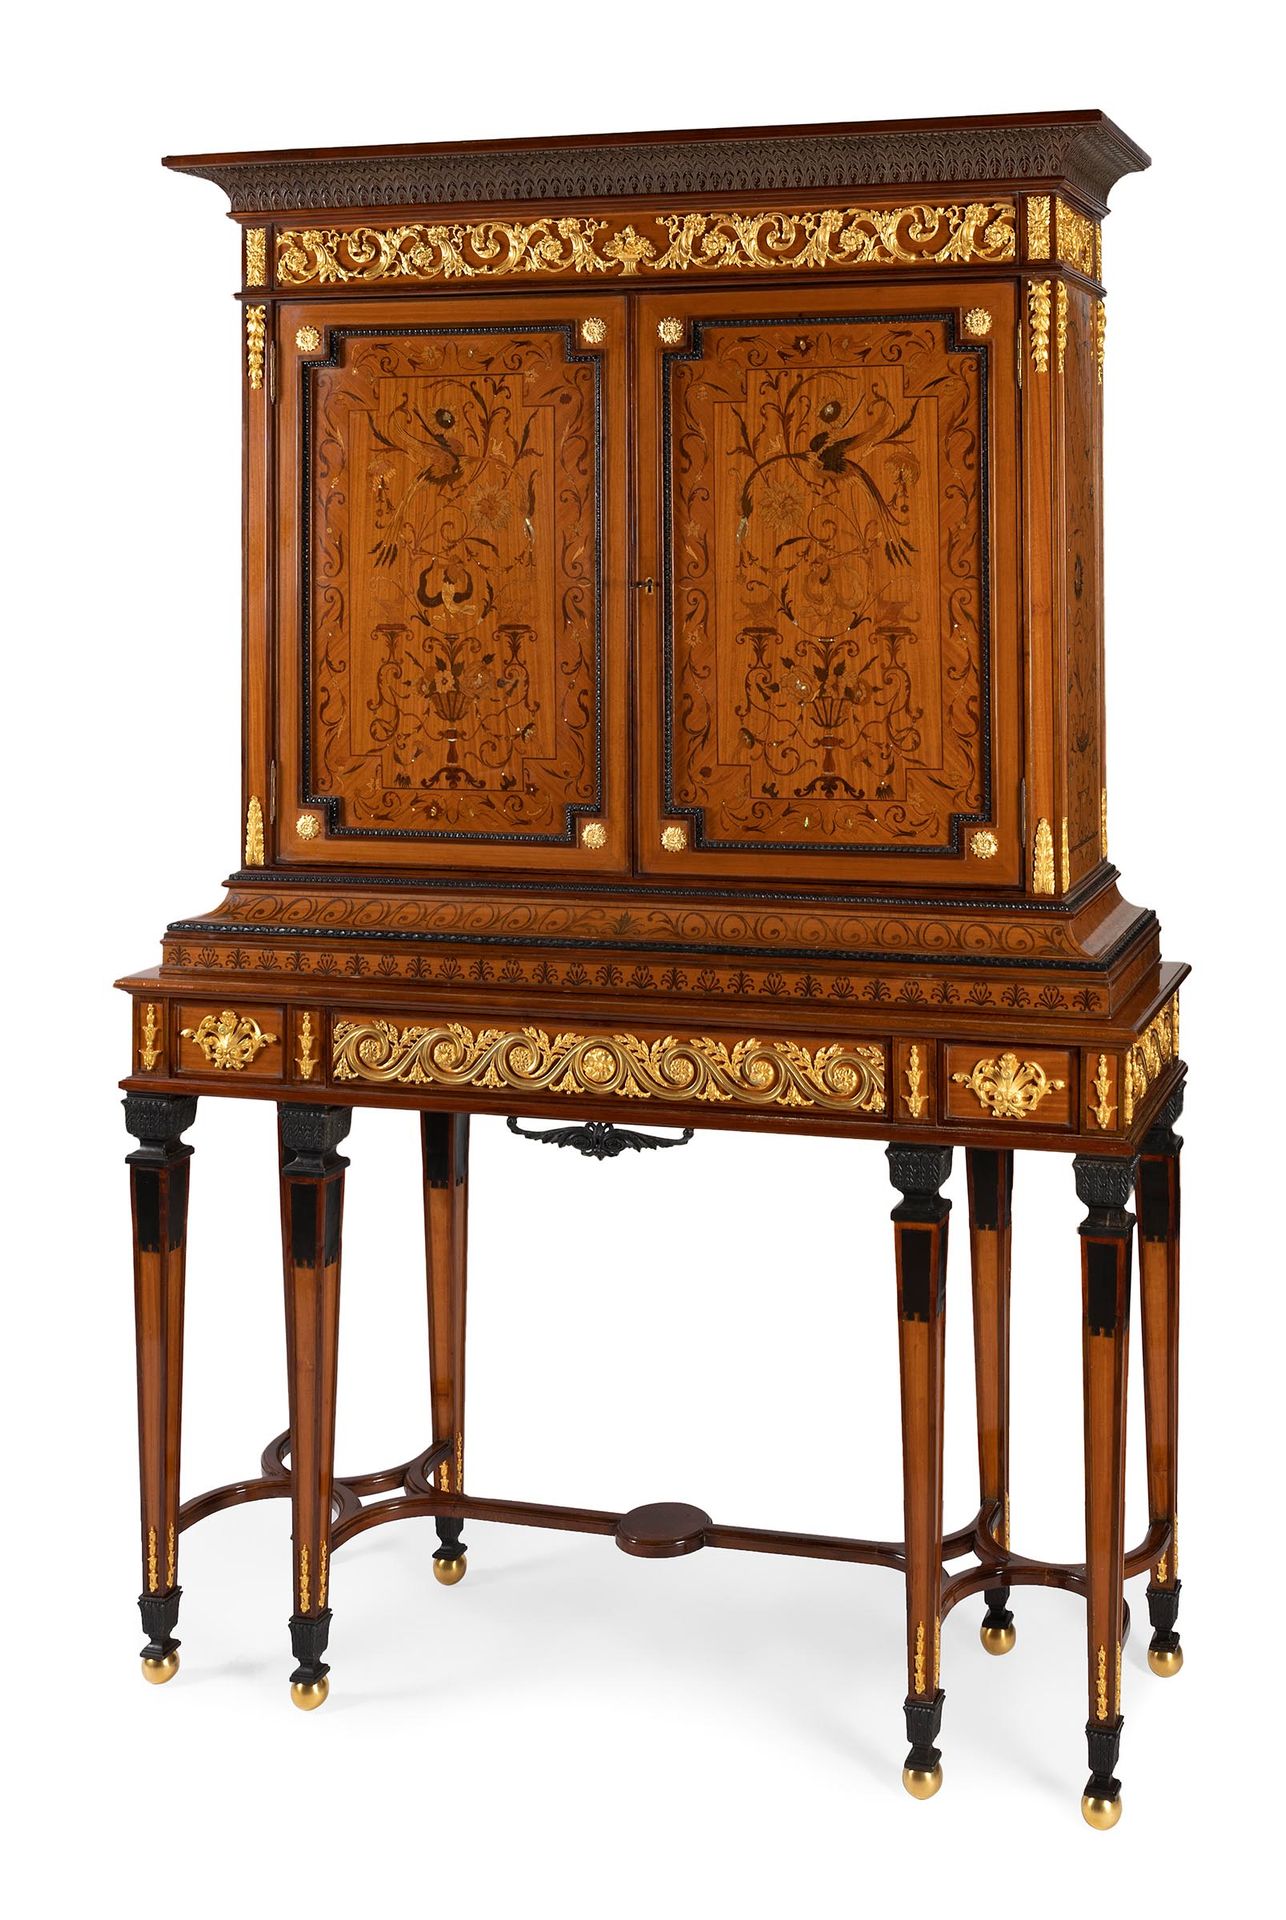 Important cabinet Napoleon III. France, late 19th century. Important cabinet Nap&hellip;